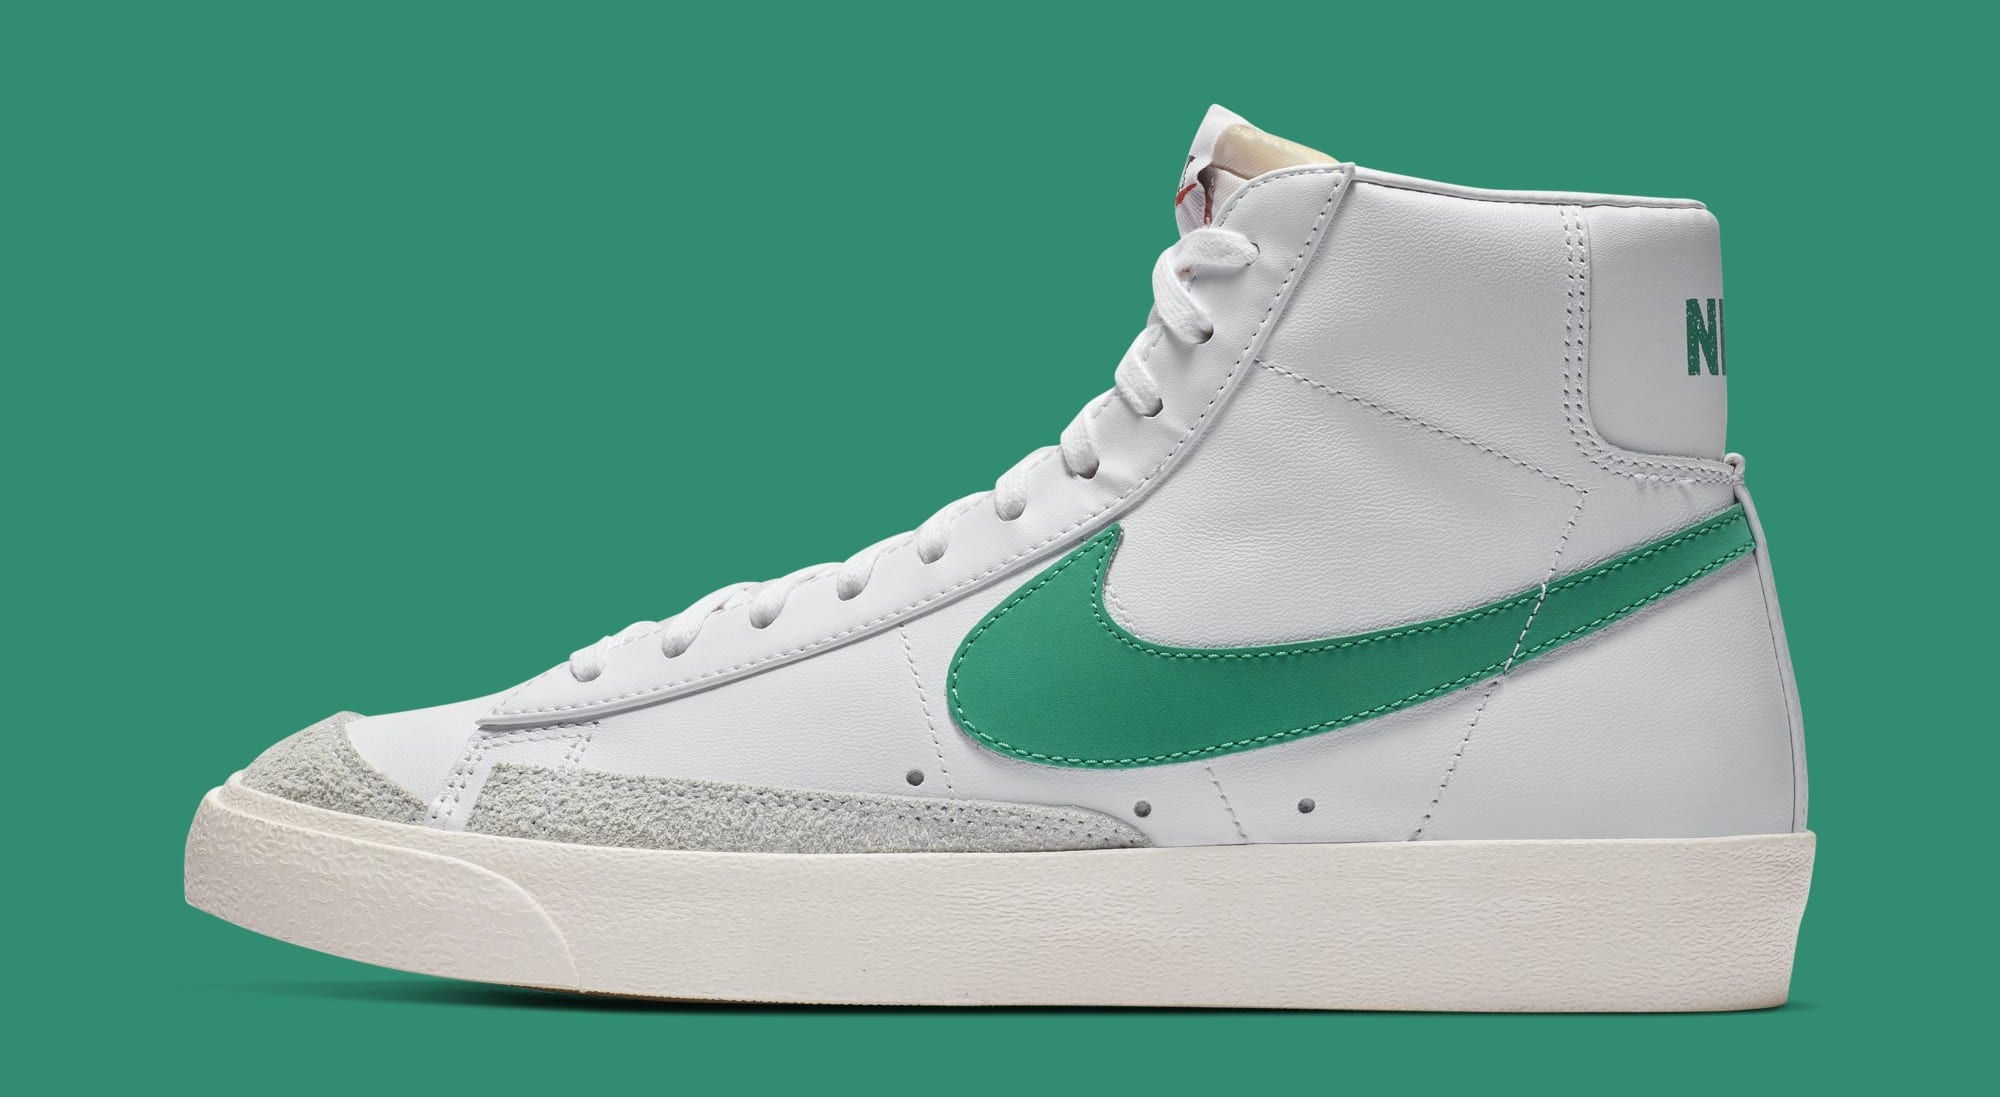 Nike Blazer 'Habanero Red' 'Pacific 'Lucid Green' Release Date | Sole Collector